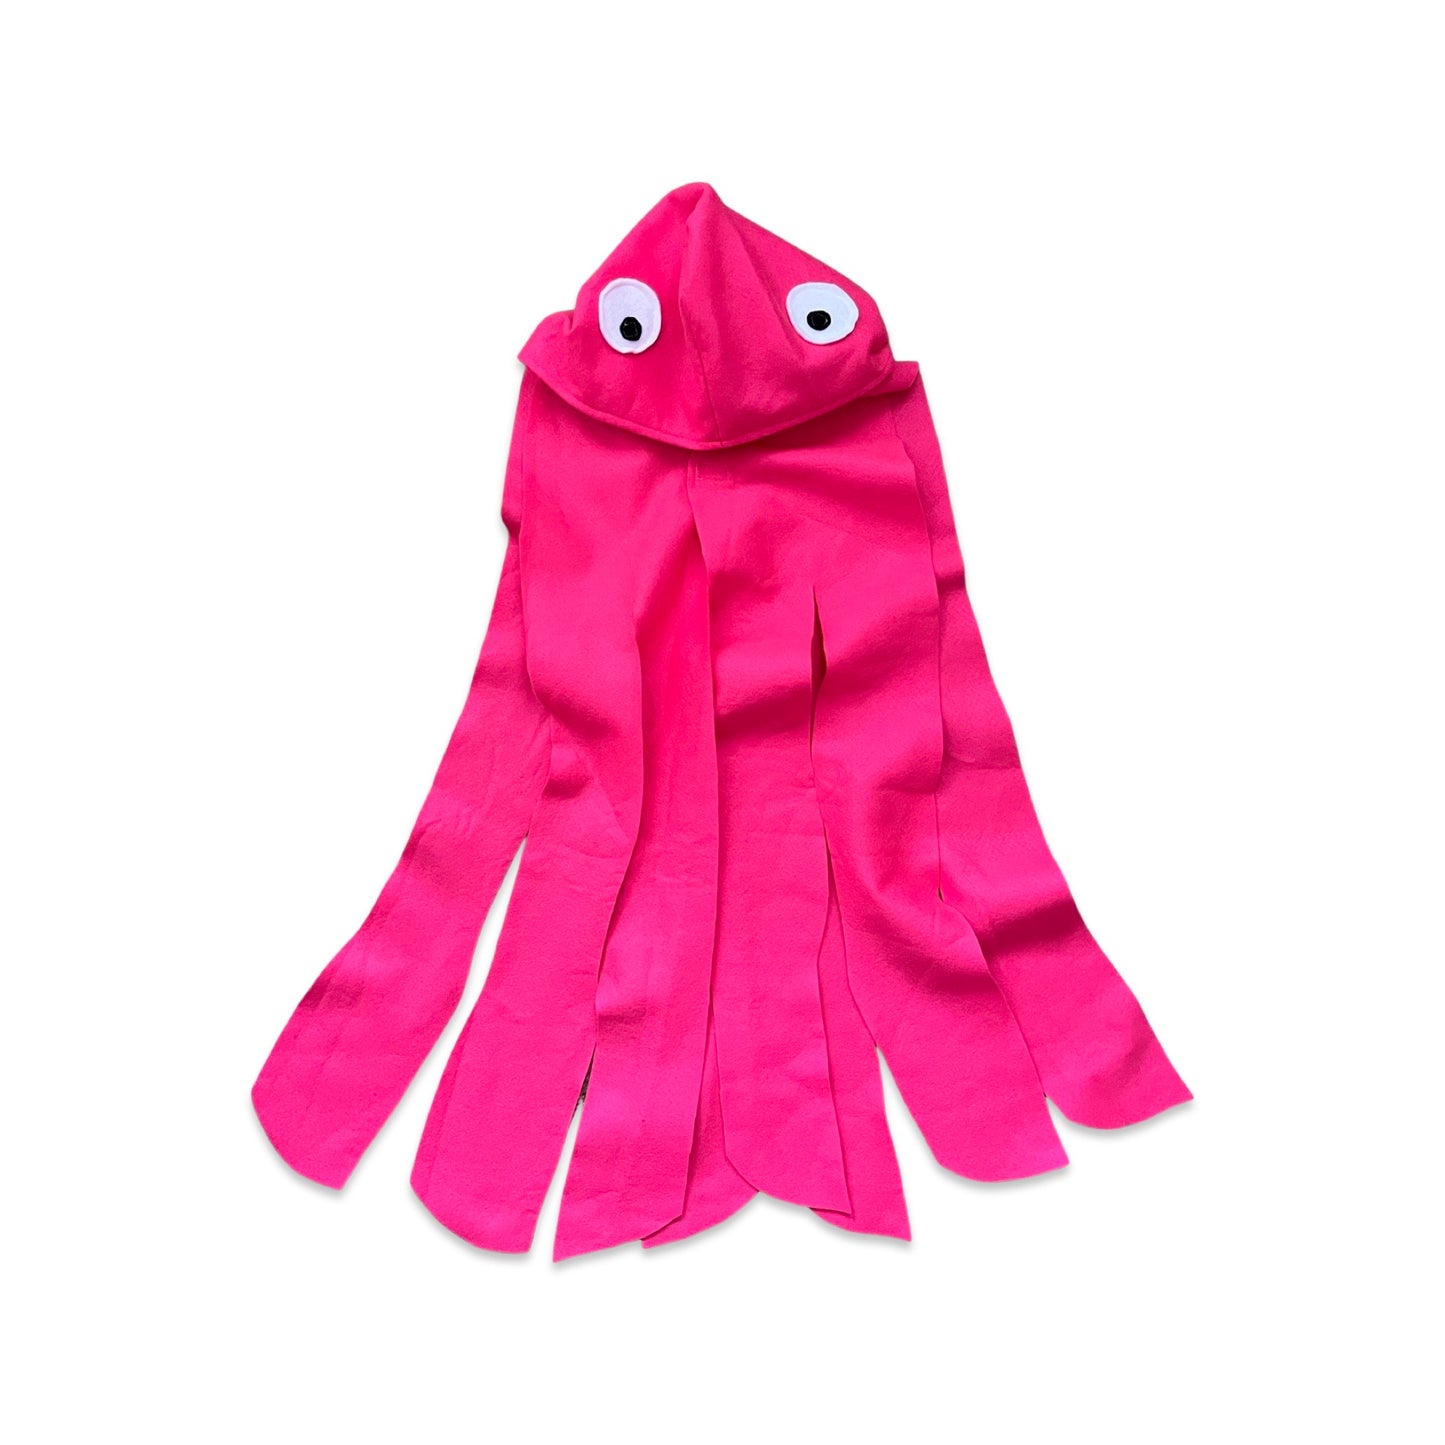 Toddler Octopus Cape, Halloween Costume - 6 Colors Available